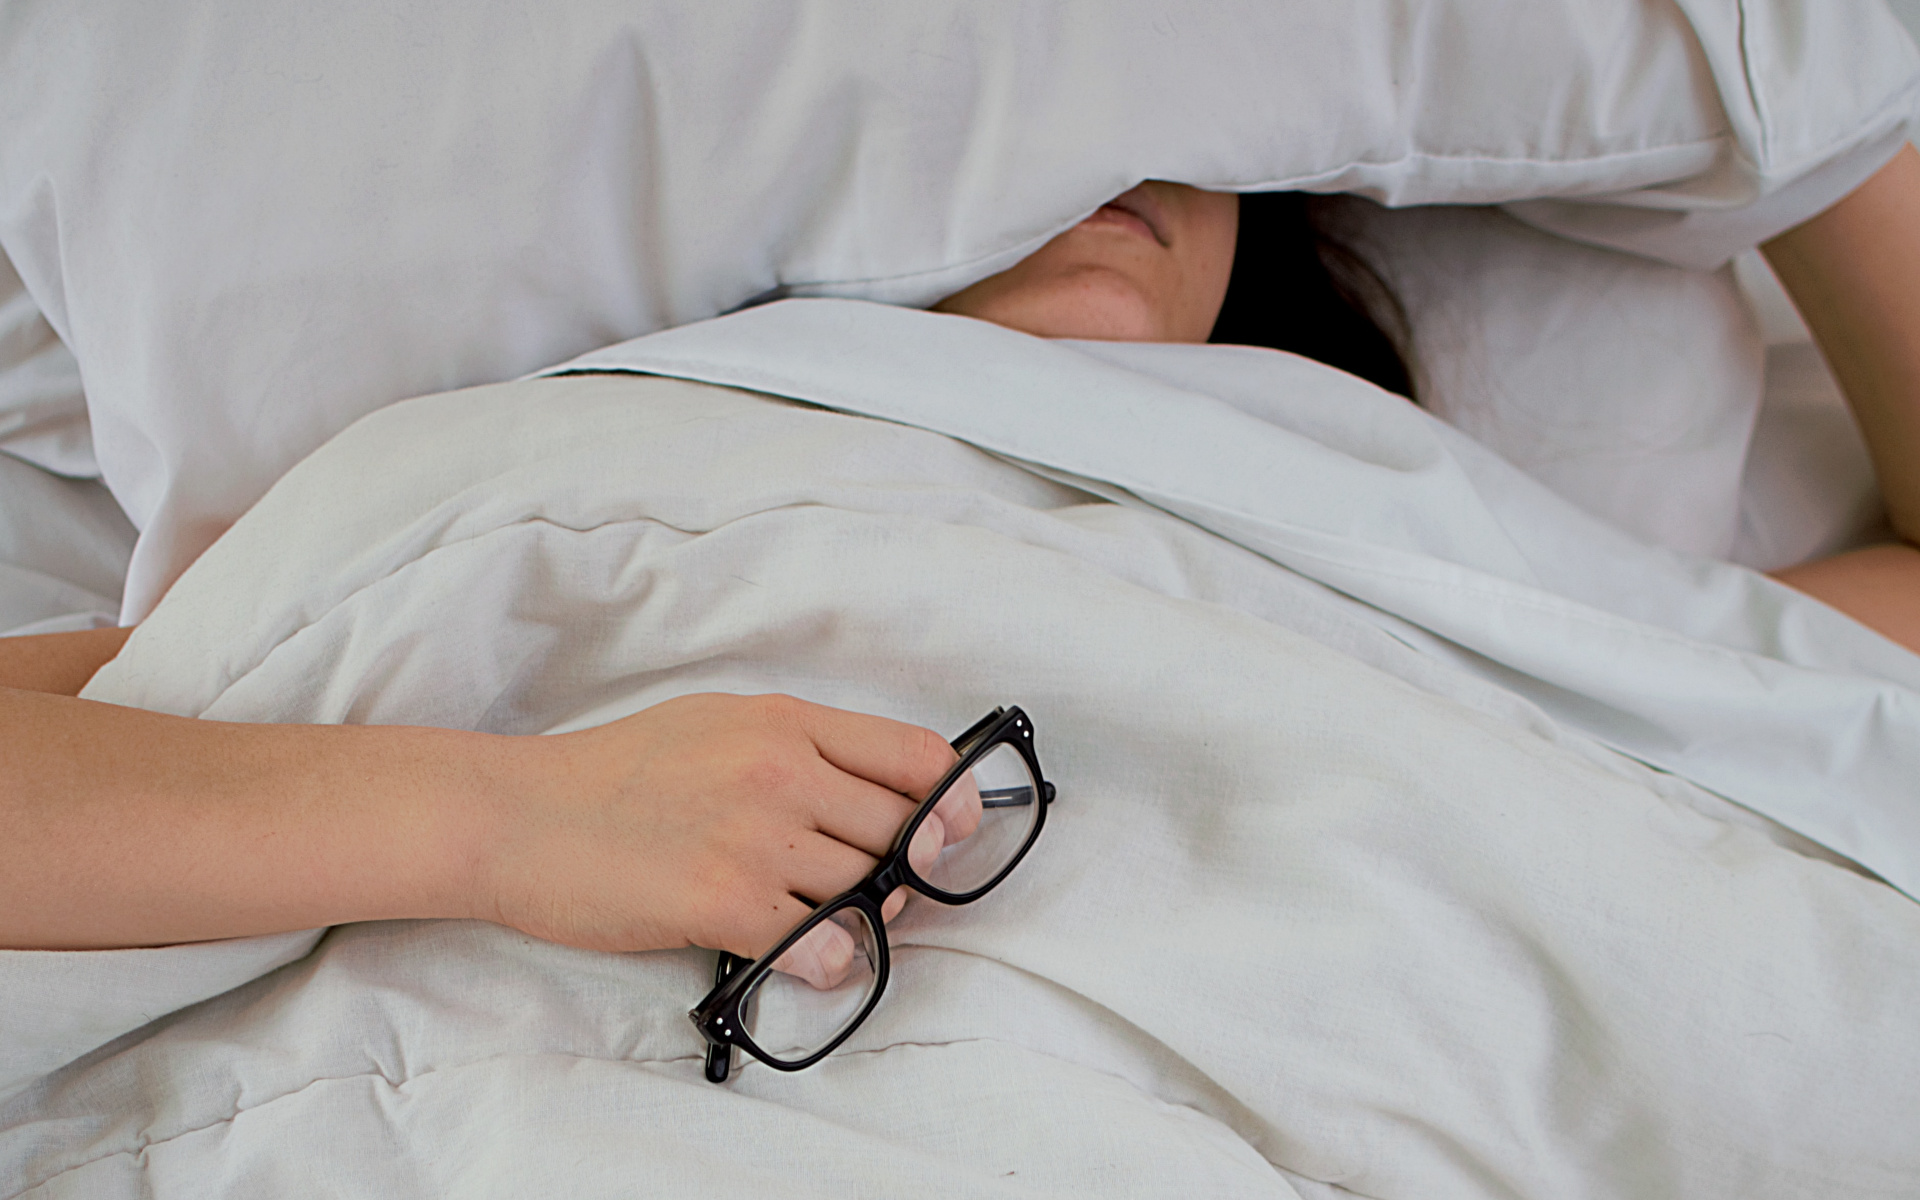 Woman Sleeping In Bed With Pillow Over Her Face